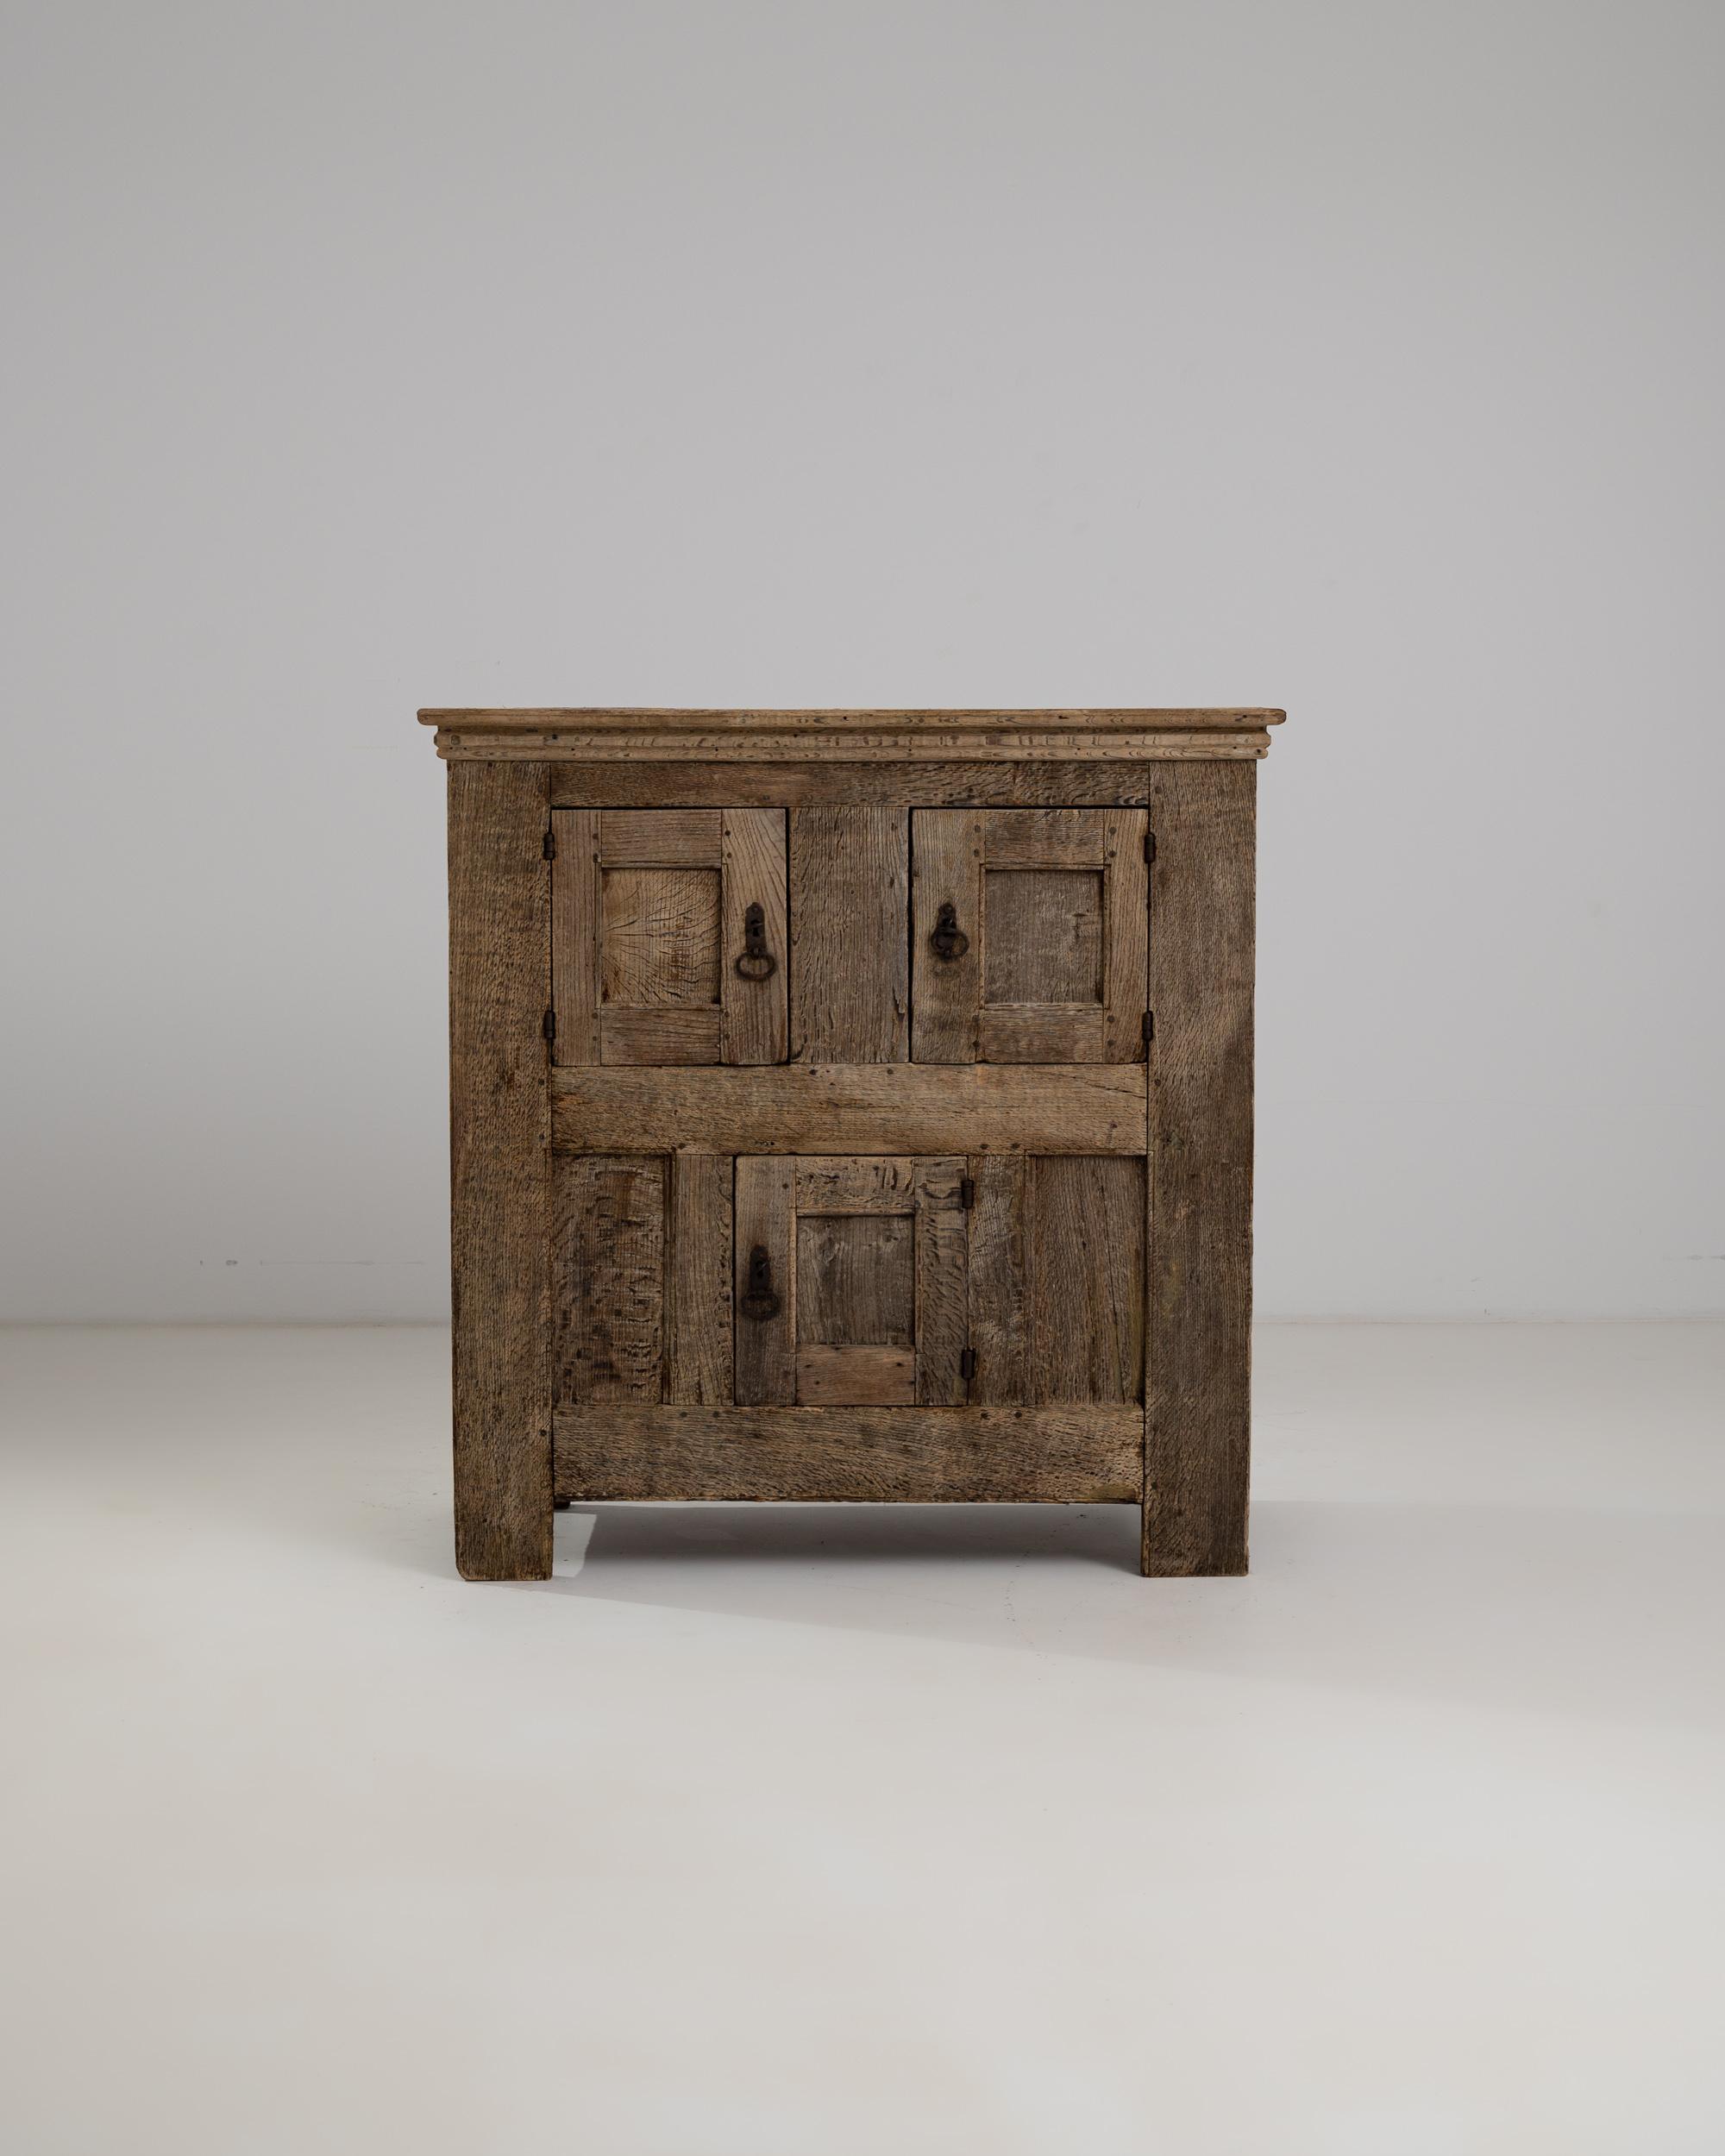 Simple, rustic and beautifully constructed, this antique oak buffet has stood the test of time. Made in Germany in the 1700s, decoration is kept to a minimum– allowing the thoughtful composition to speak for itself. A trio of square doors creates a